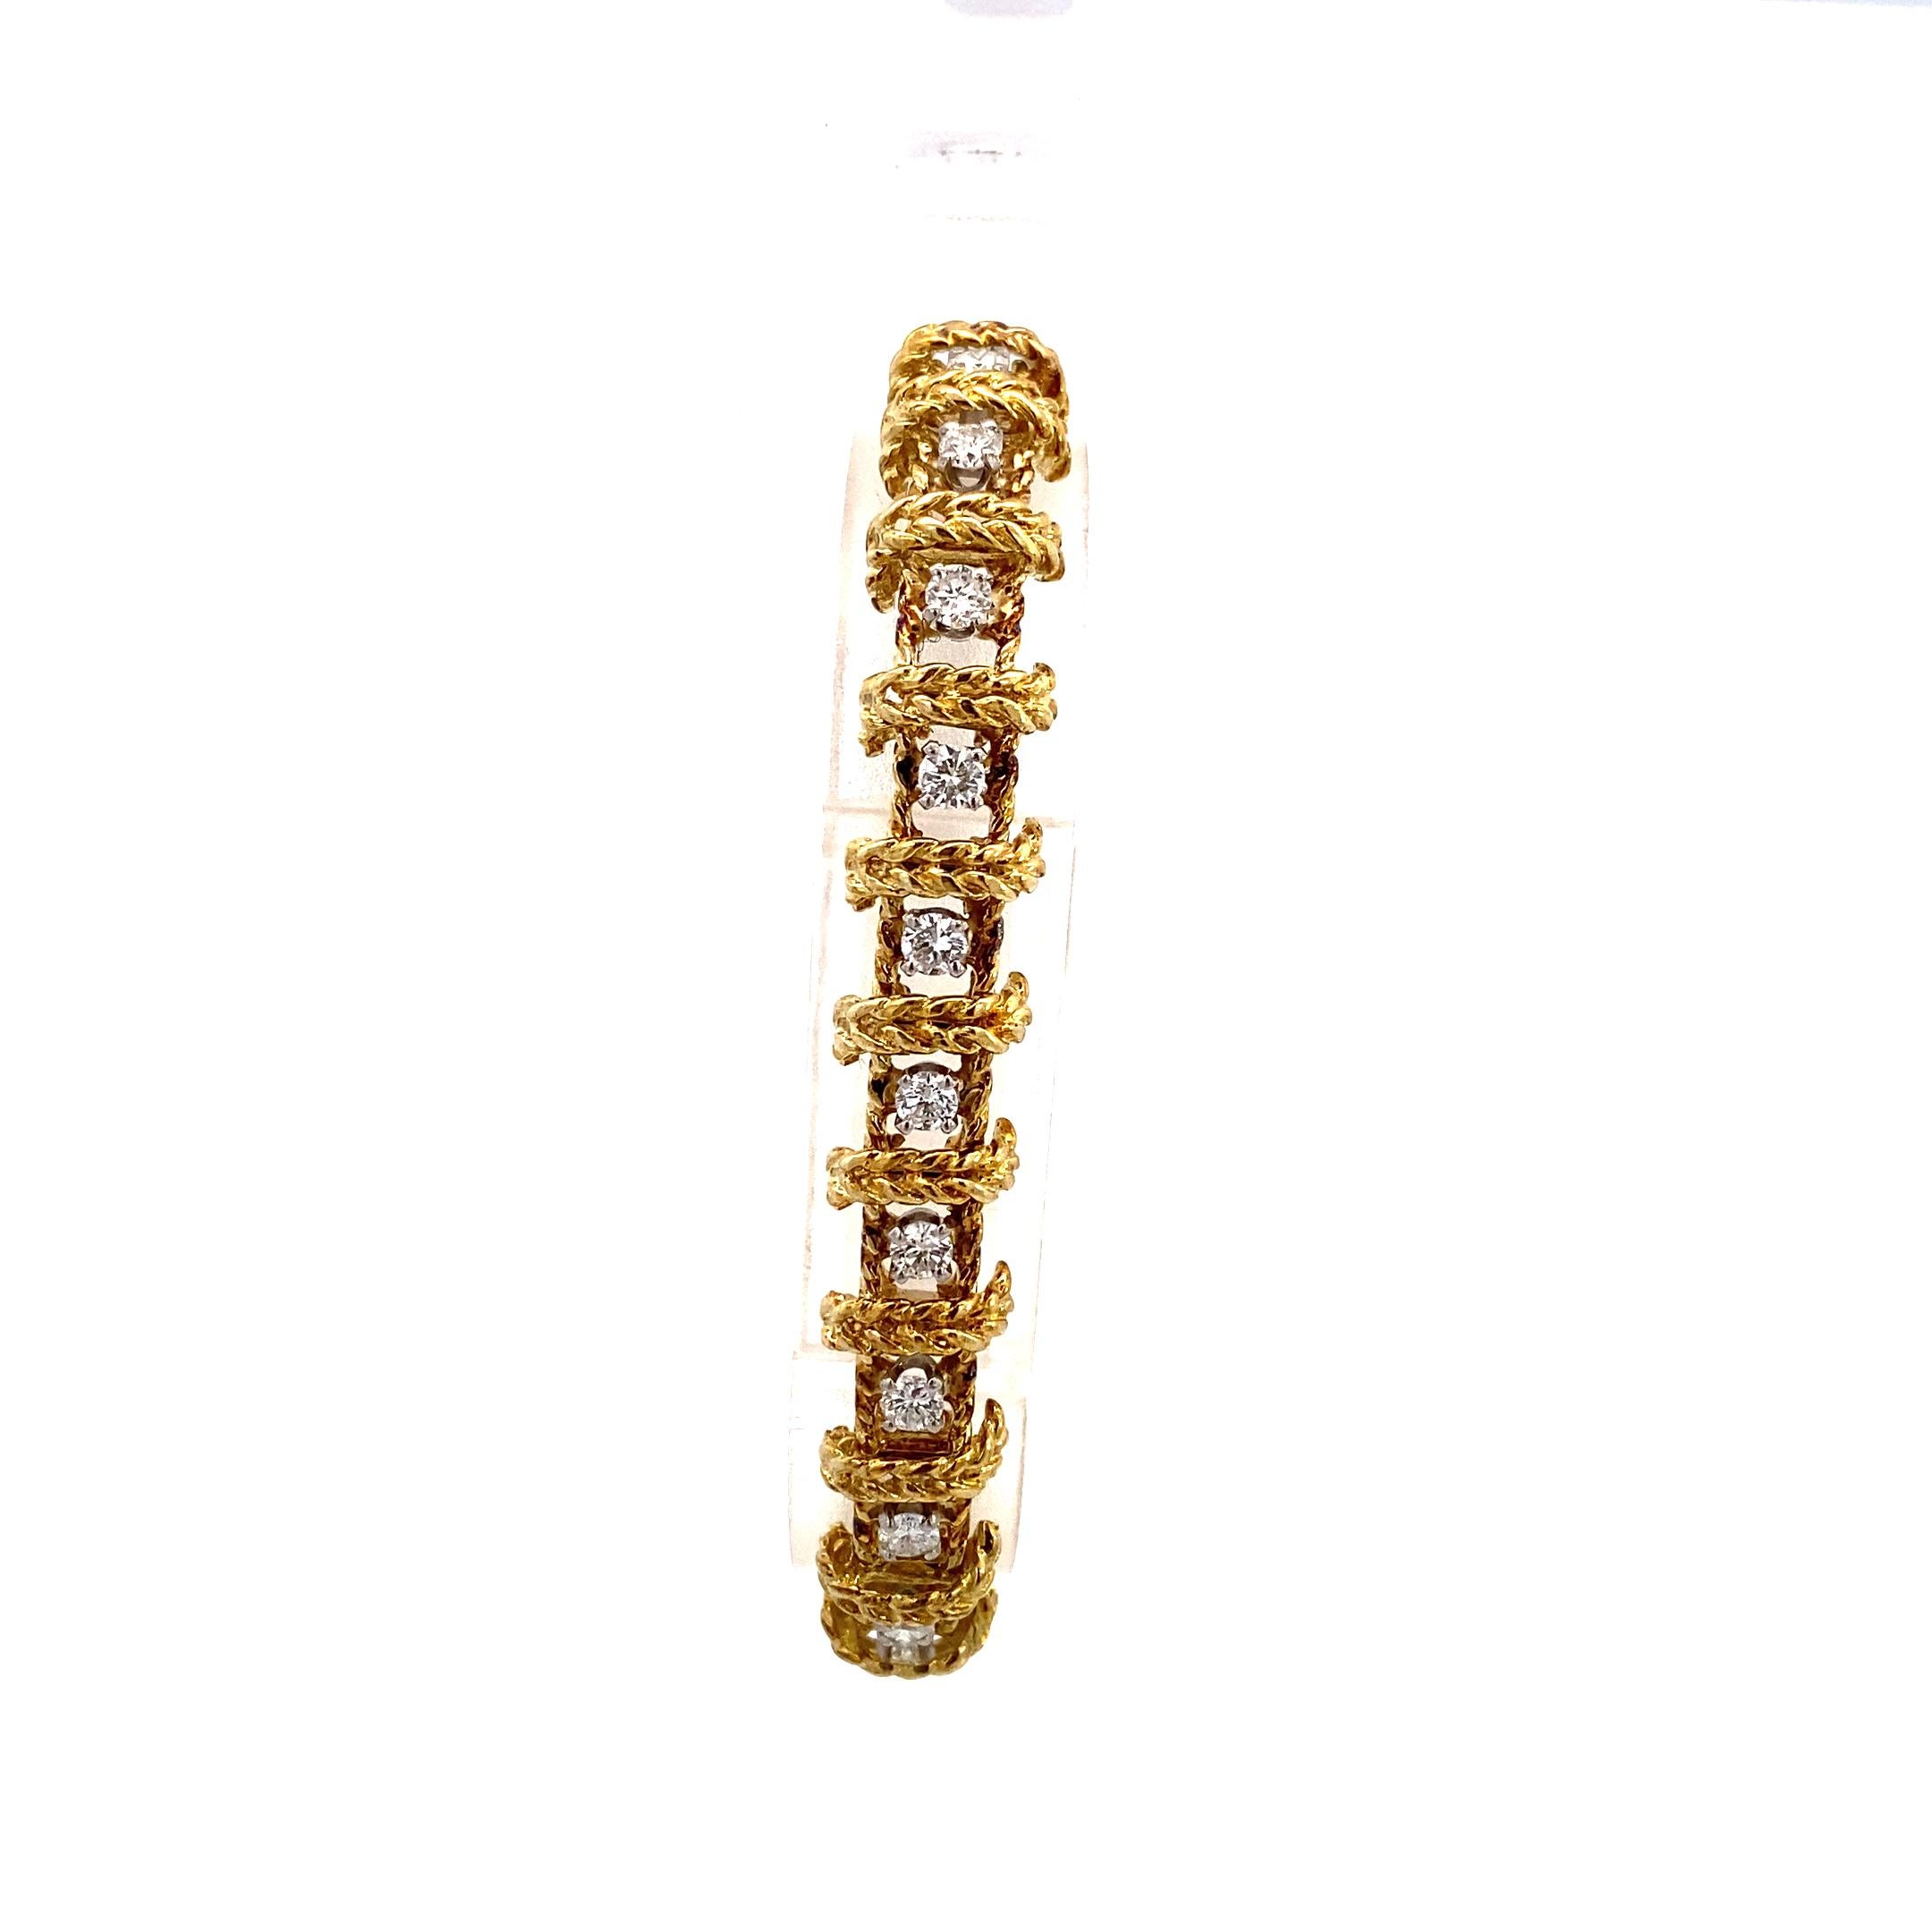 Vintage Diamond and Yellow Gold Tennis Bracelet Featuring this stunning 7 inch, 14K yellow gold vintage tennis bracelet with 24= 1.70Ctw round brilliant cut diamonds. Total weight is 17.8Dwt or 27.7 grams - substantial solid gold, yet comfortable